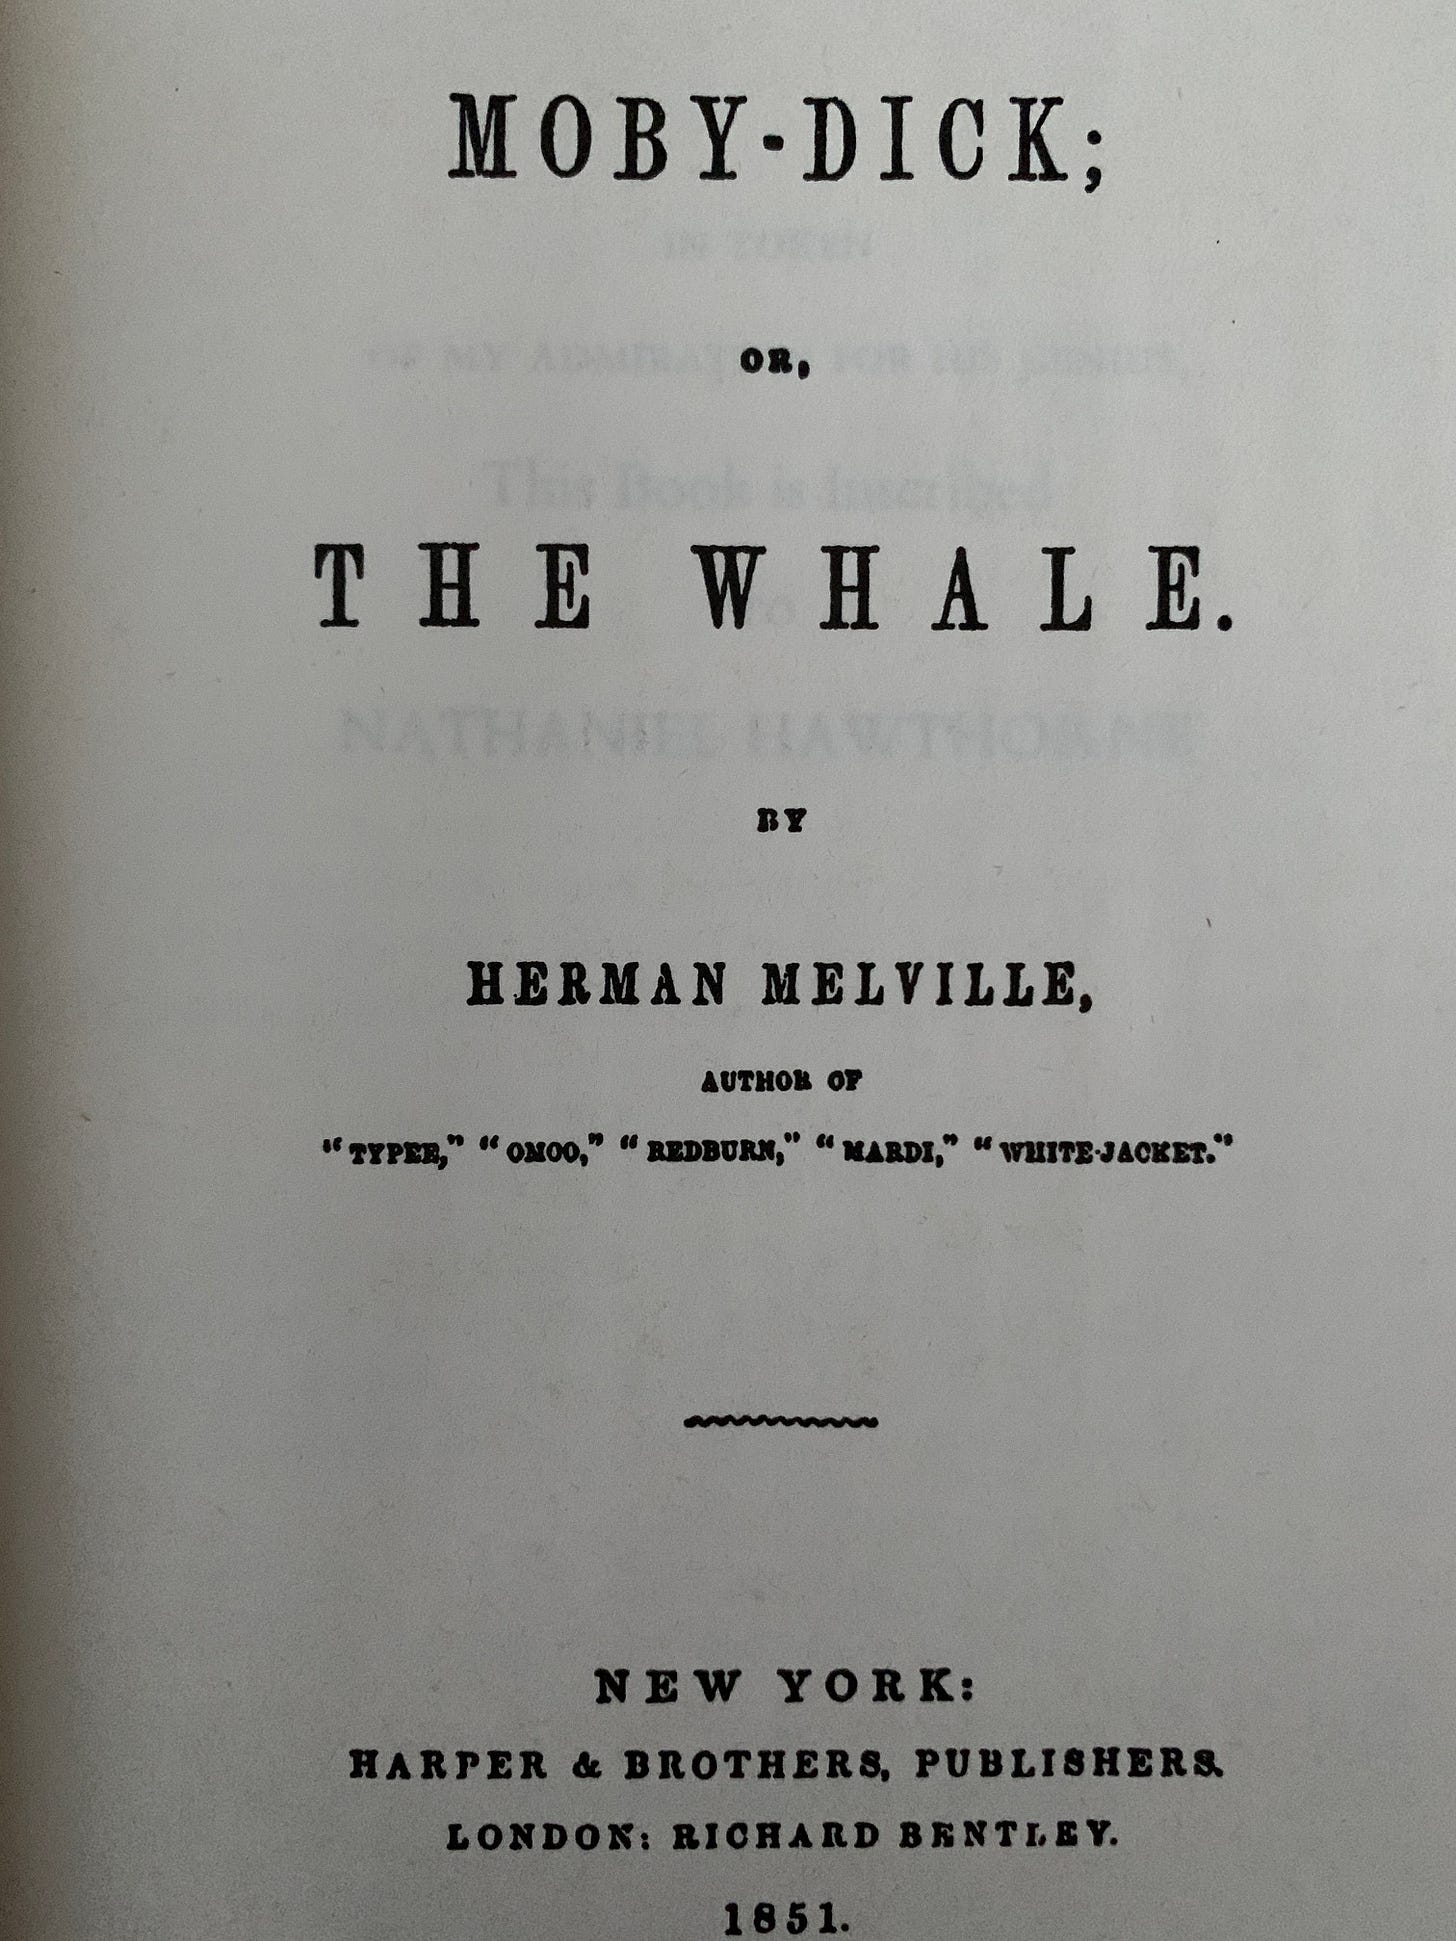 the title page of a book, it reads "Moby-Dick or, The Whale. by Herman Melville"